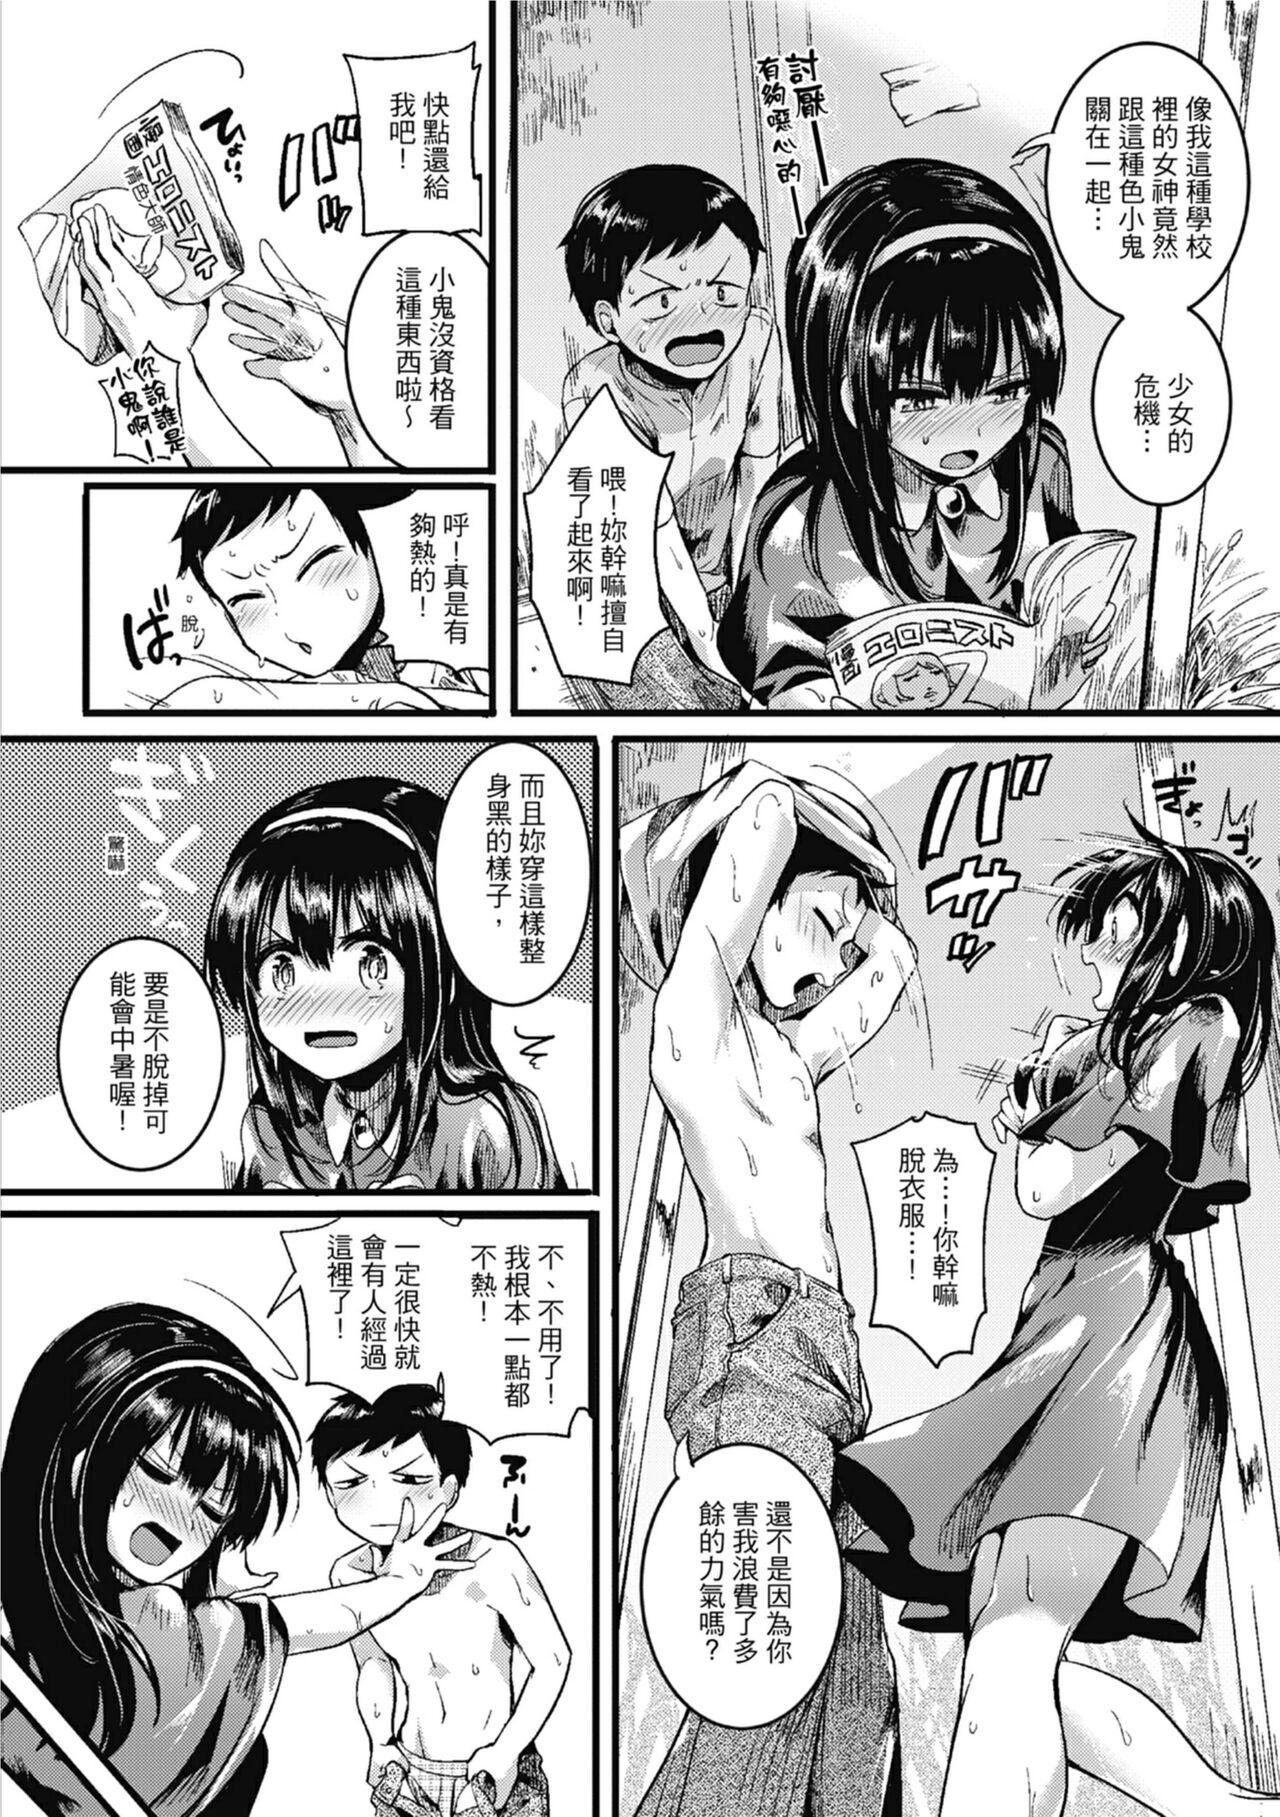 Gay Physicals Koi Yagate Midara - Nasty after Love. | 戀愛後就變淫蕩了 Fucking Sex - Page 10